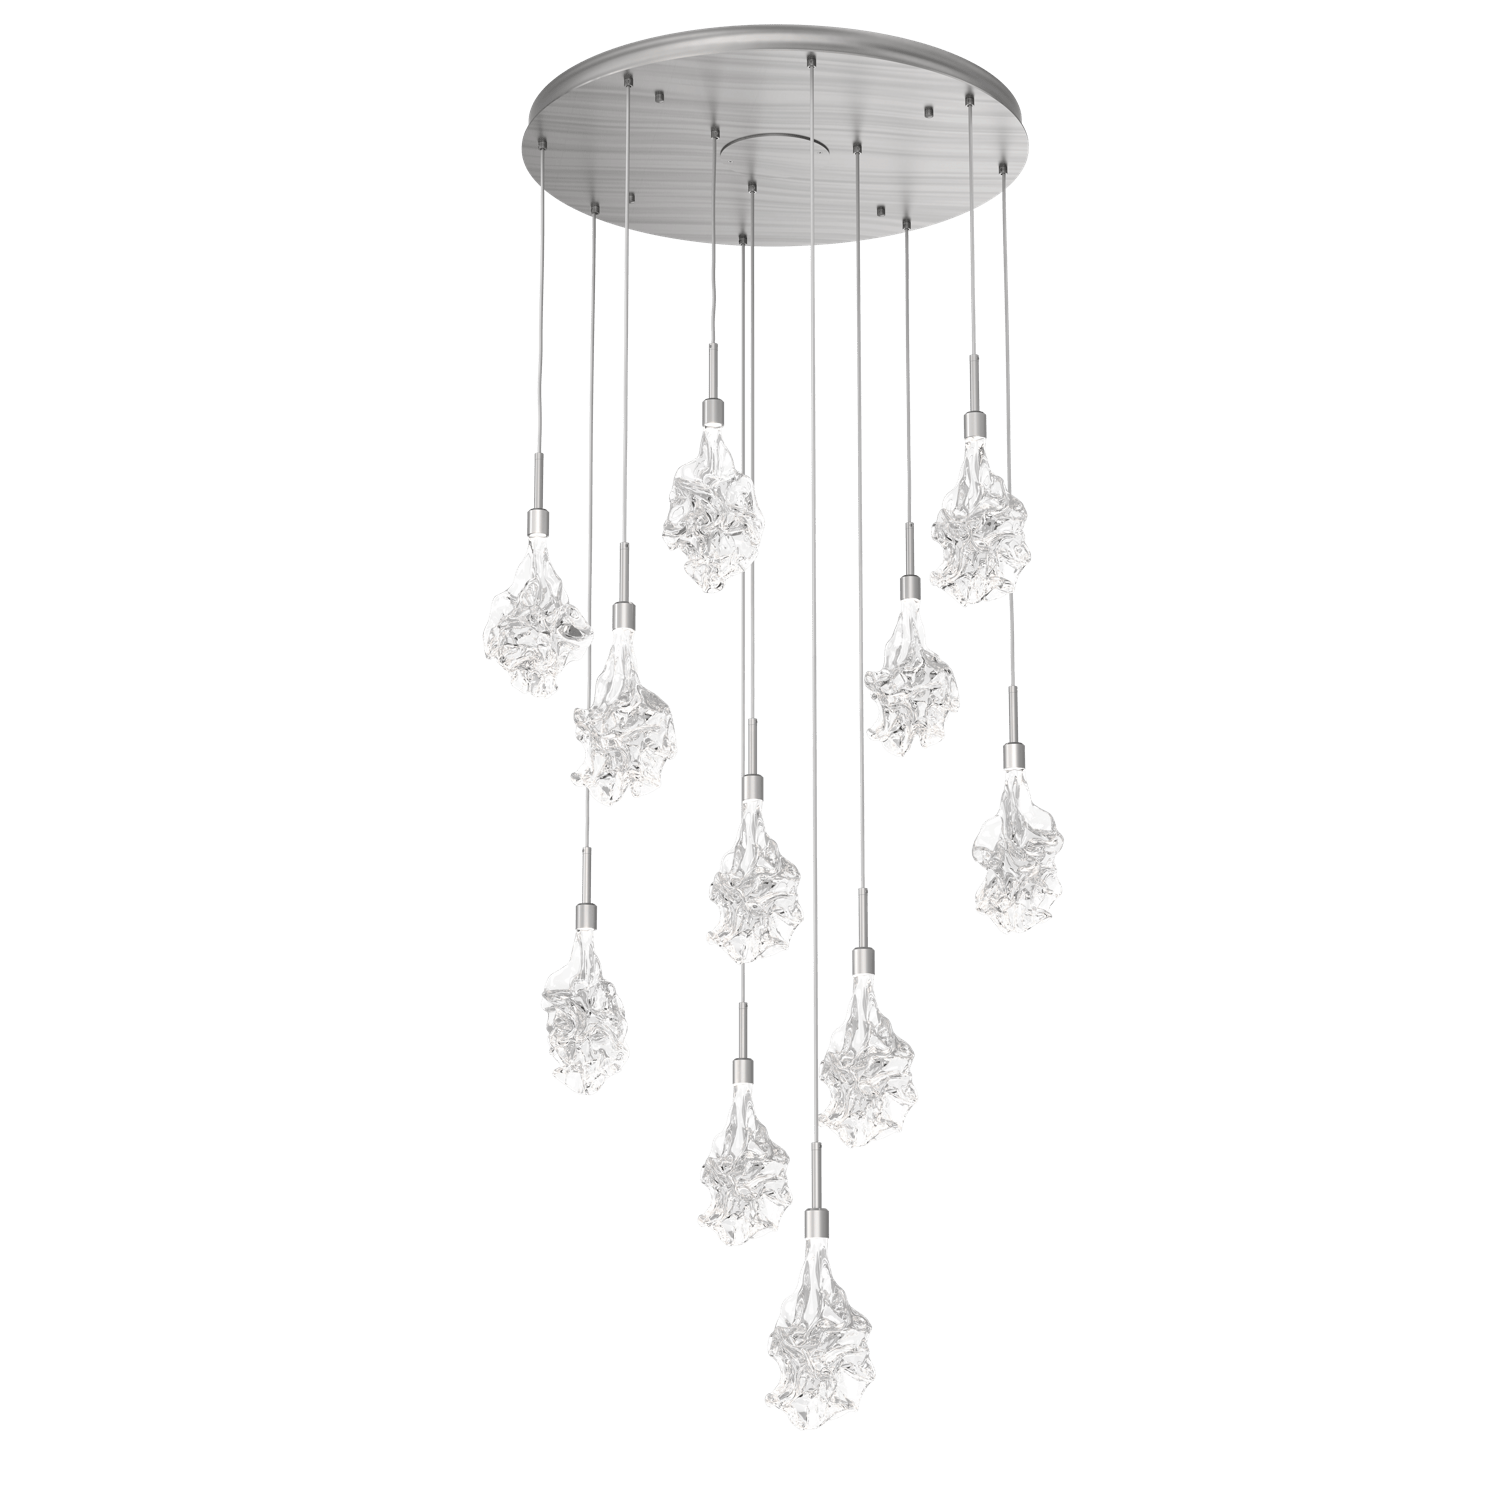 CHB0059-11-SN-Hammerton-Studio-Blossom-11-light-round-pendant-chandelier-with-satin-nickel-finish-and-clear-handblown-crystal-glass-shades-and-LED-lamping